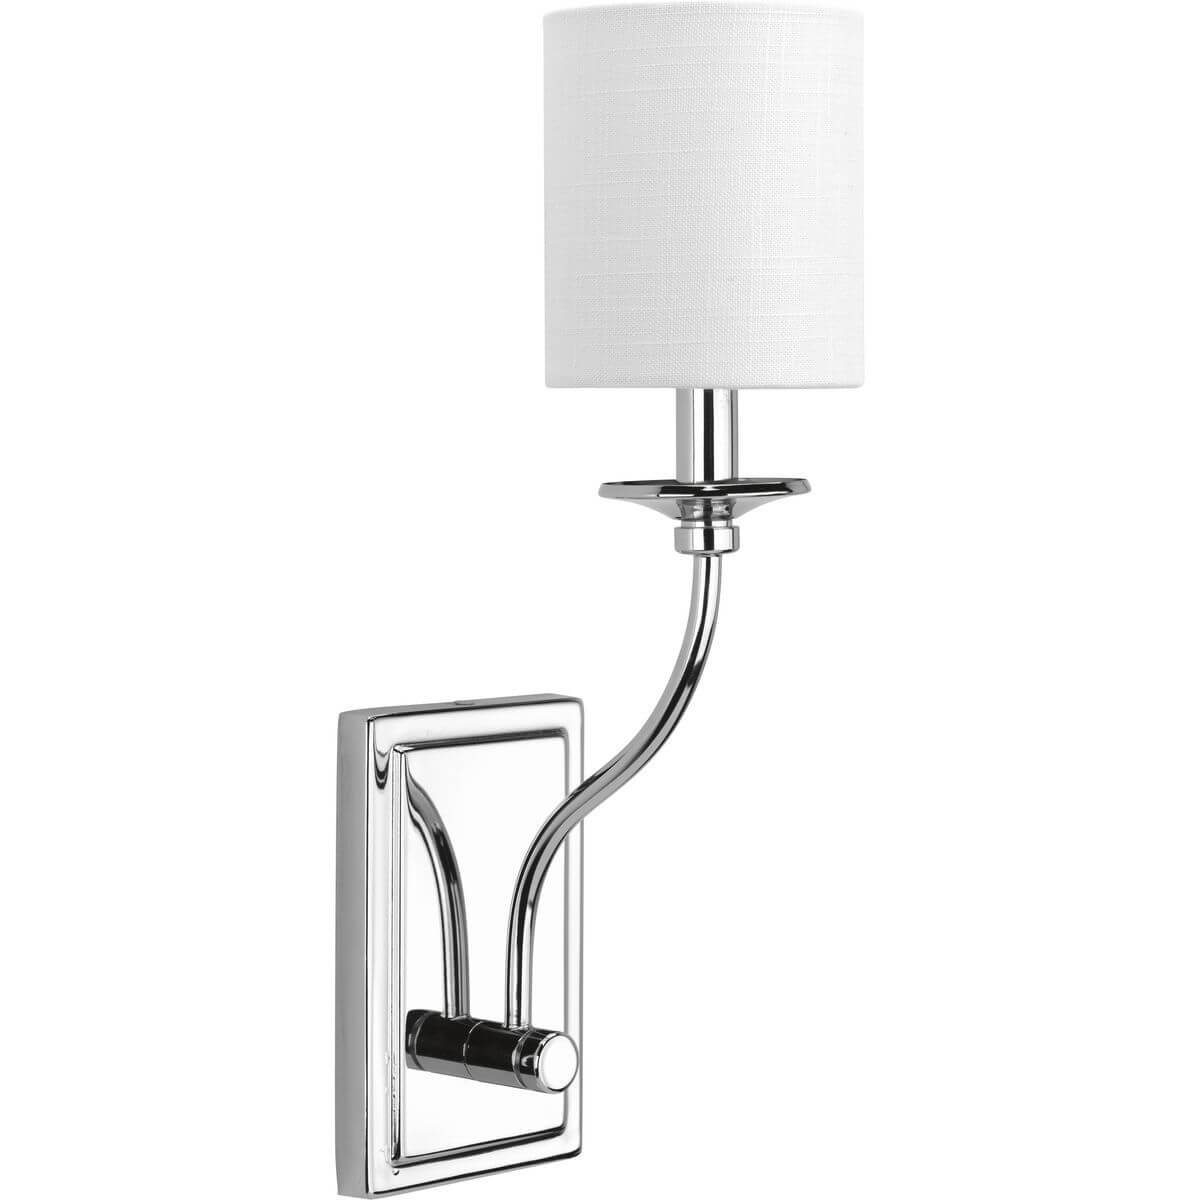 Progress Lighting Bonita 1 Light 17 inch Tall Wall Sconce in Polished Chrome with Summer Linen Fabric Shade P710018-015